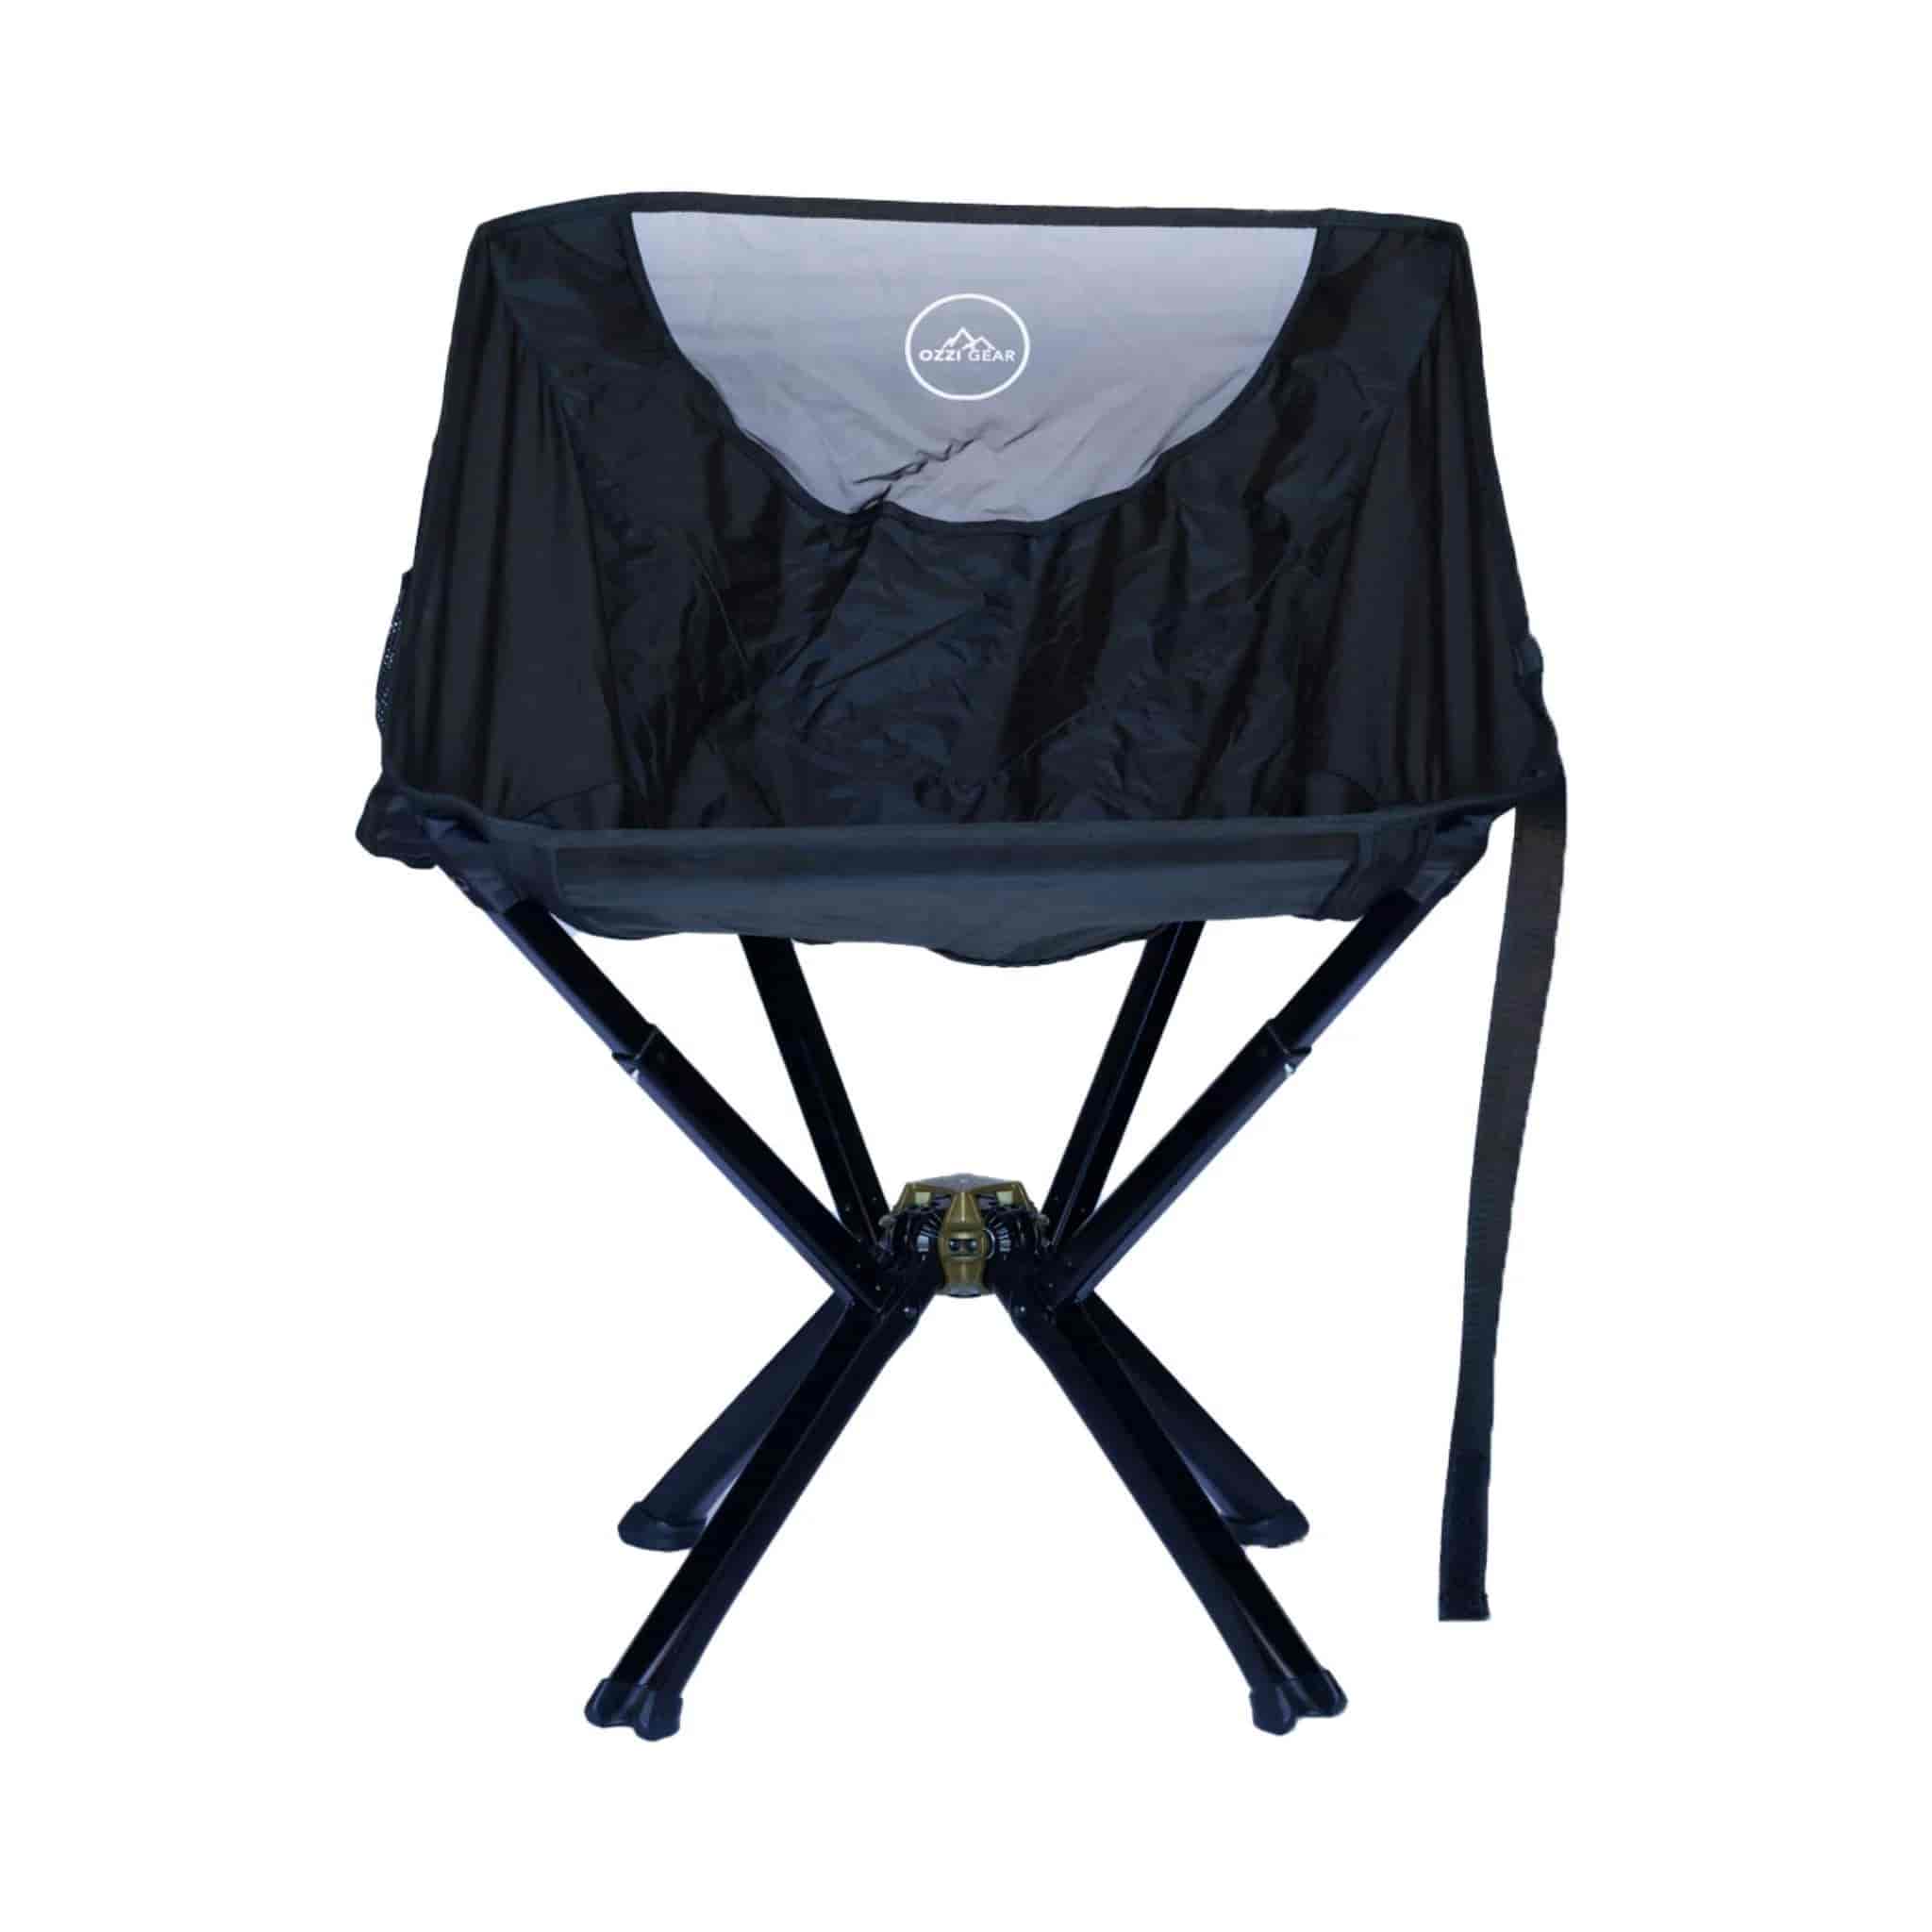 The Ozzi Outdoor Chair - Australias Most Compact Outdoor Travel chair